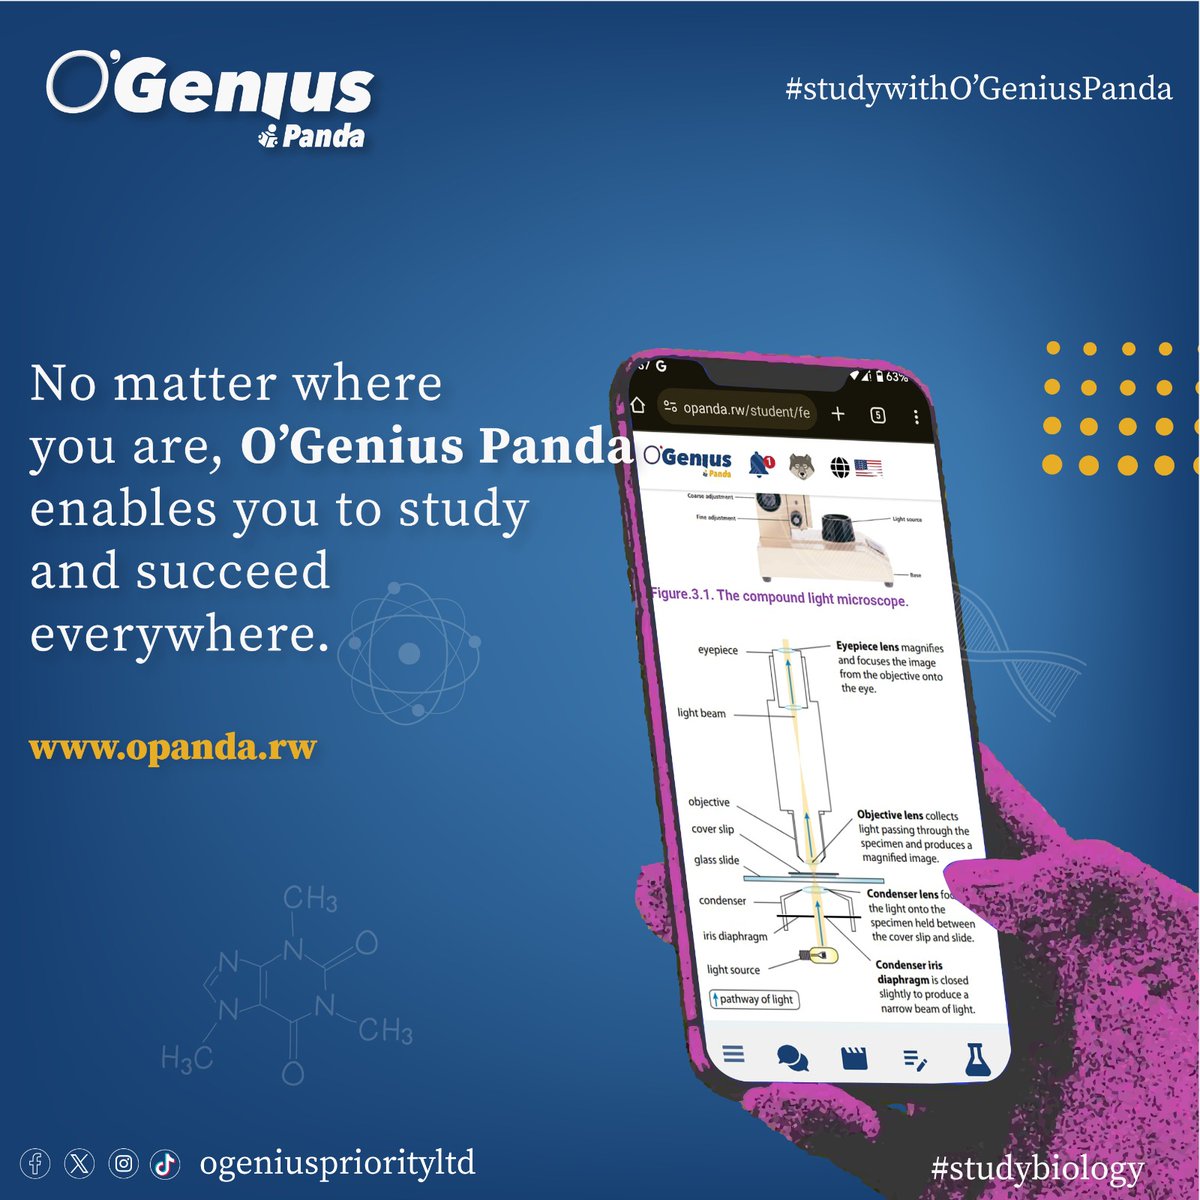 Regardless of where you are you are it doesn't limit you to using O’Genius Panda. This is highly recommended to students and teachers in secondary schools.

#OGeniusPanda  #Learnwithus #anywhereyouare